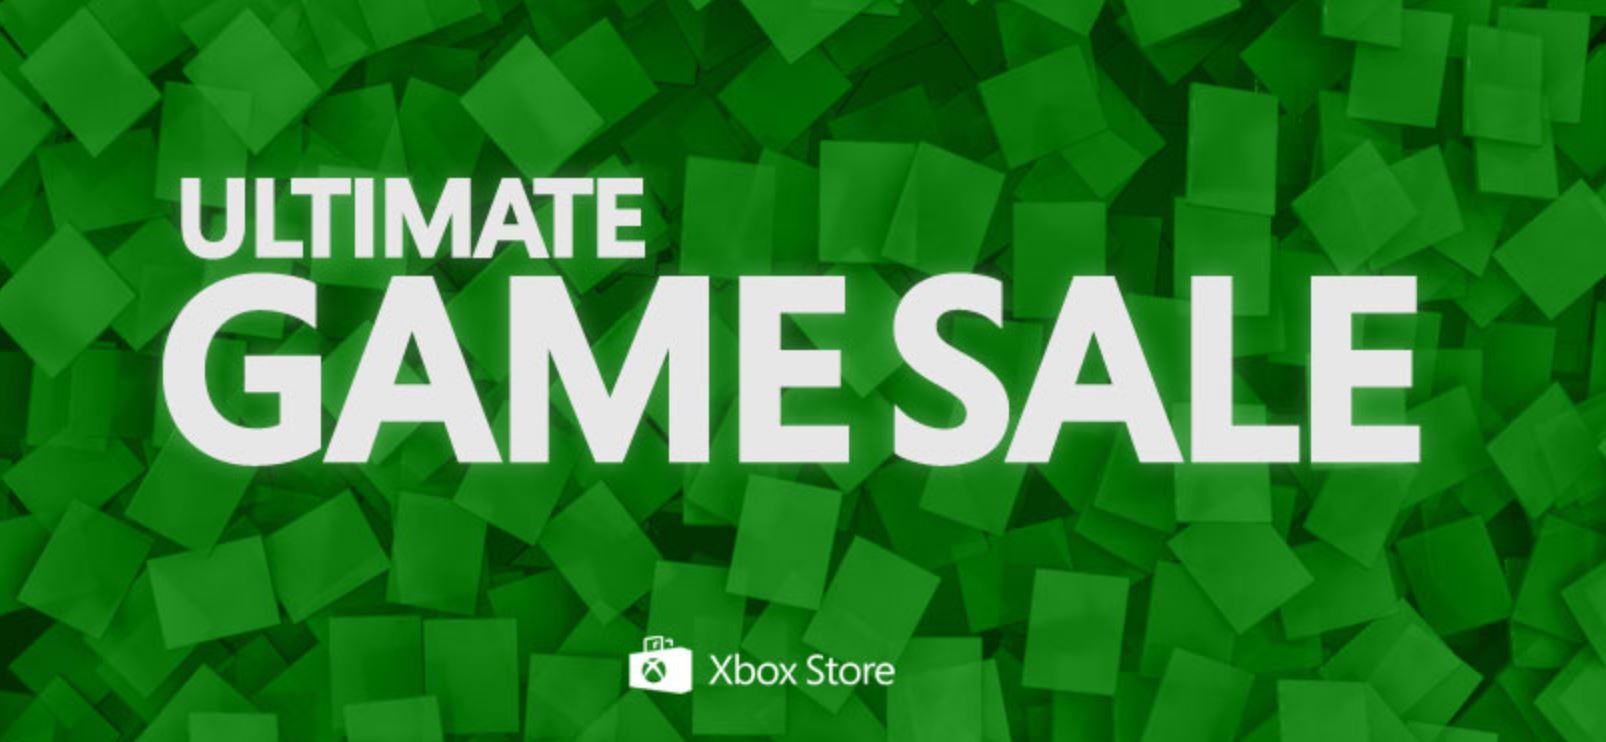 These are the titles in Microsoft’s Xbox Annual Ultimate Game Sale